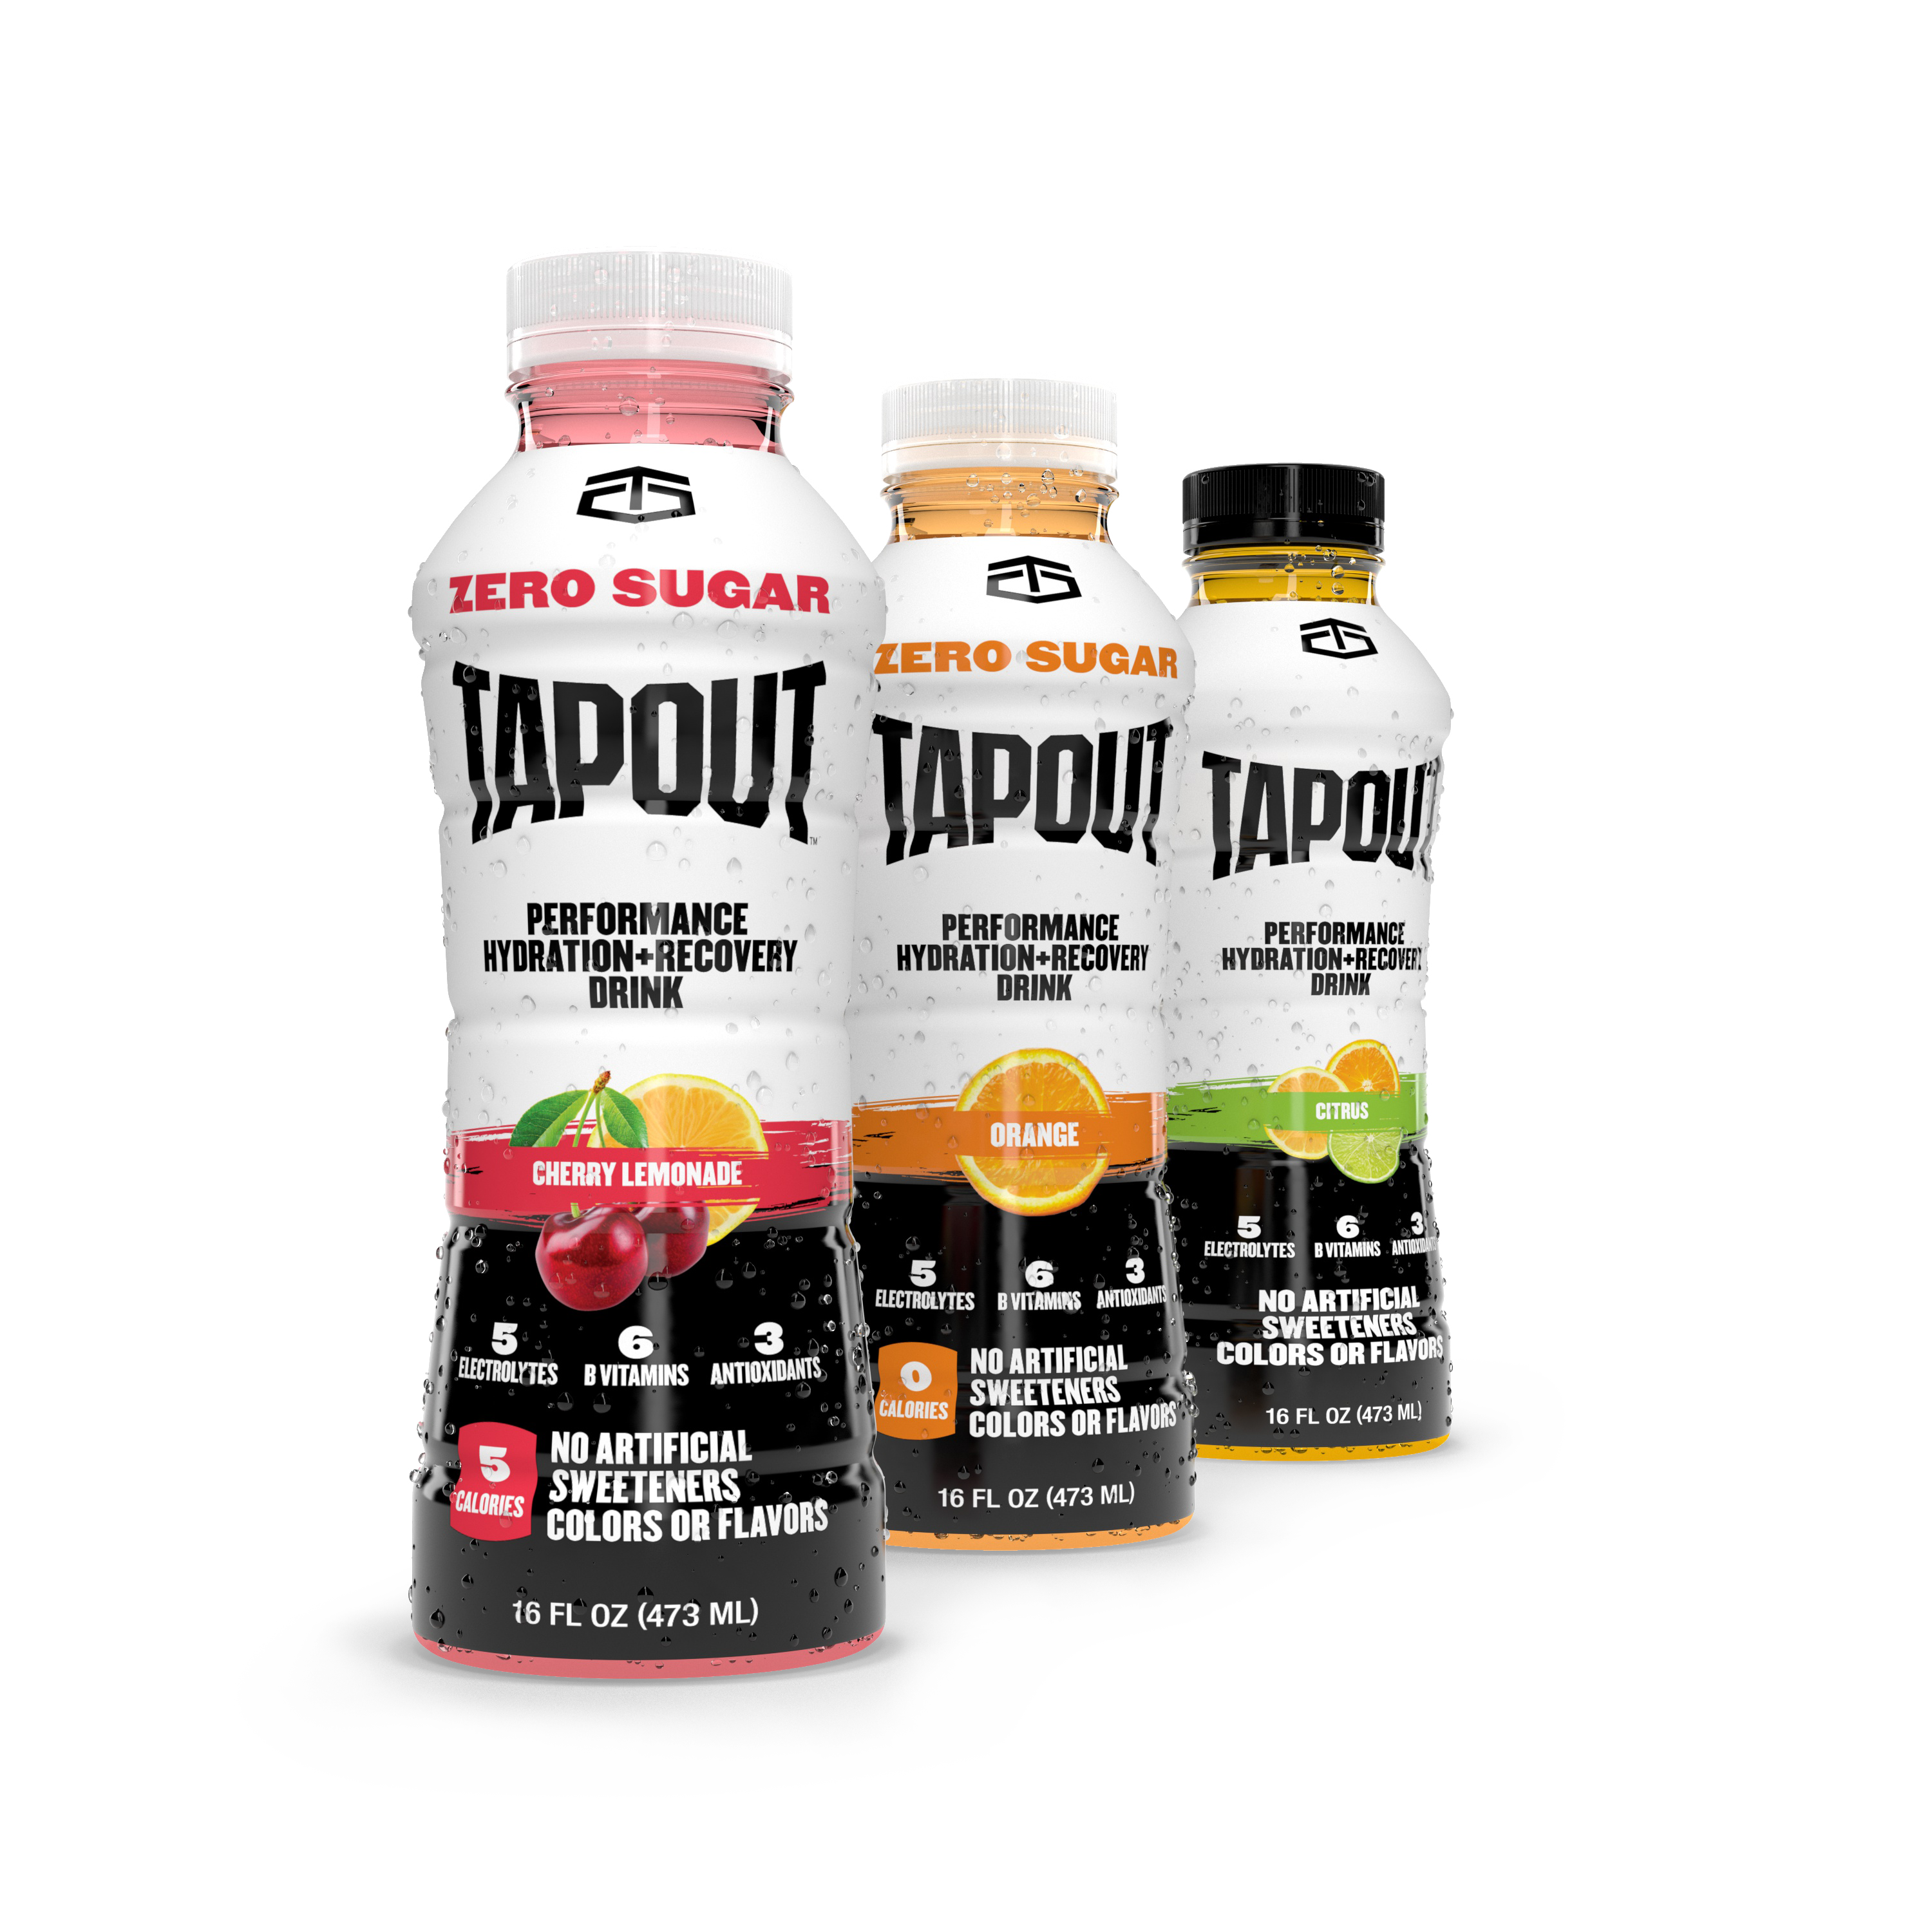 TapouT - an international lifestyle brand 